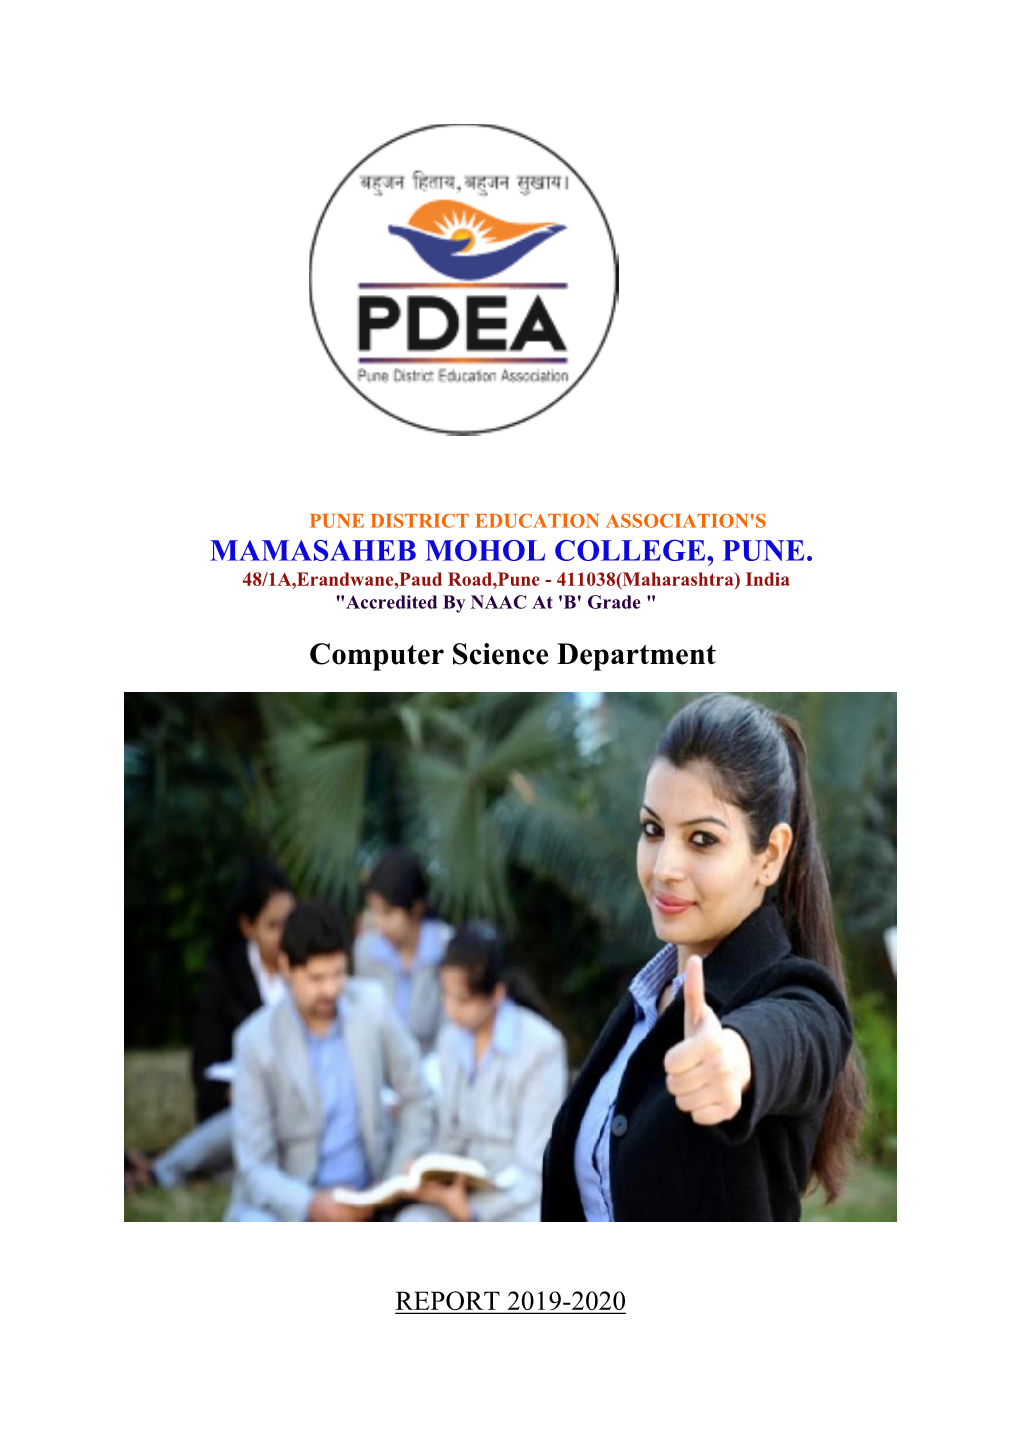 MAMASAHEB MOHOL COLLEGE, PUNE. Computer Science